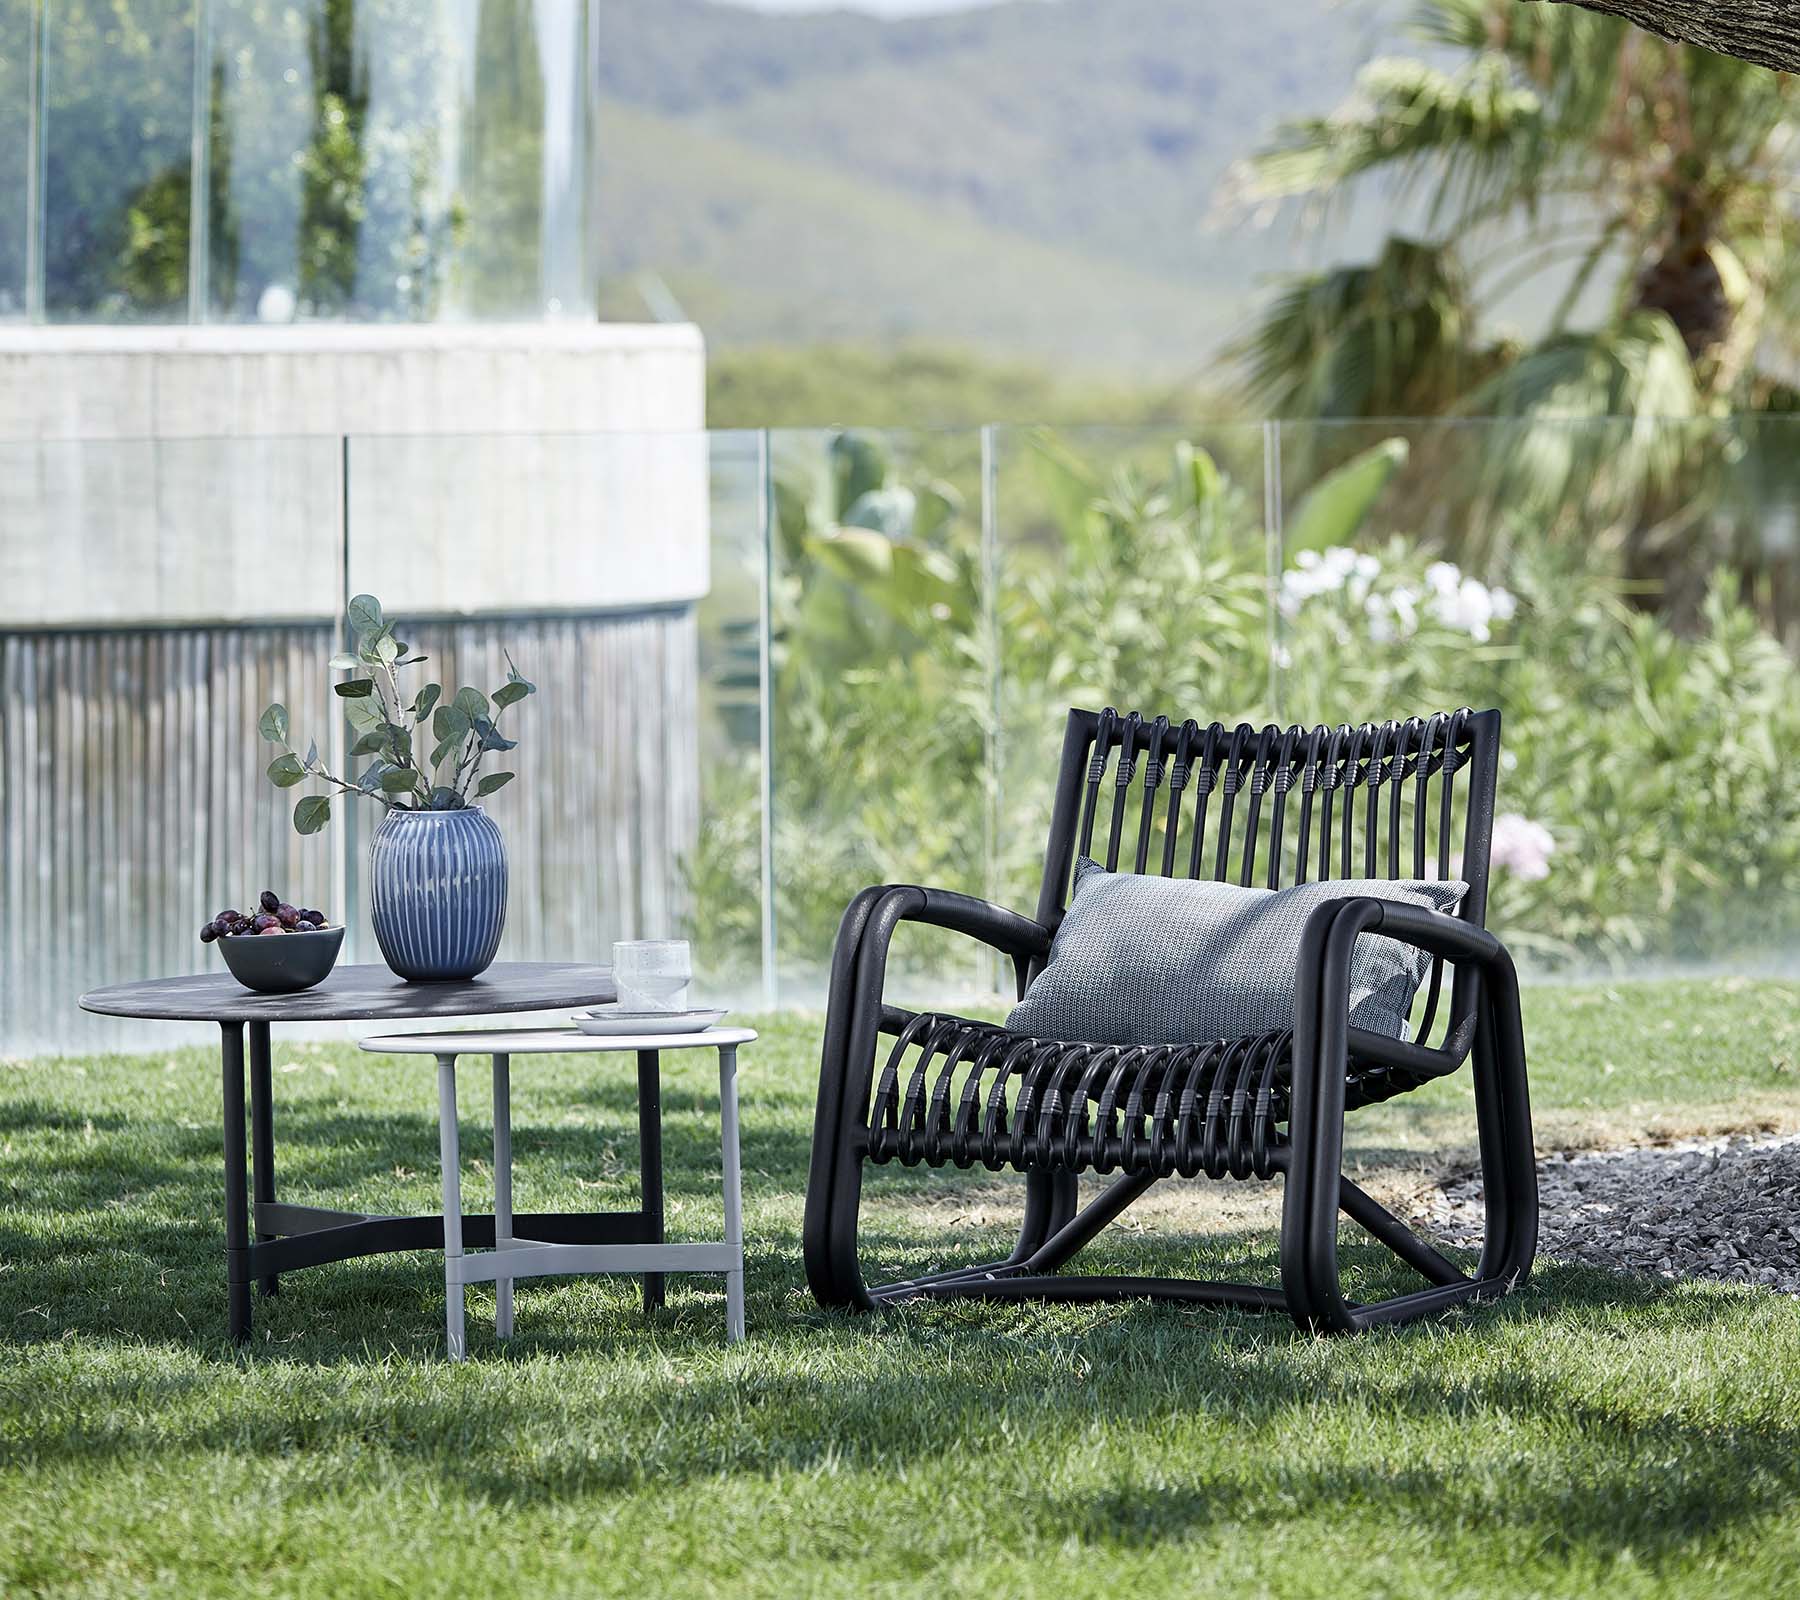 Cane-Line Denmark Outdoor Chairs Cane-Line Curve lounge chair OUTDOOR